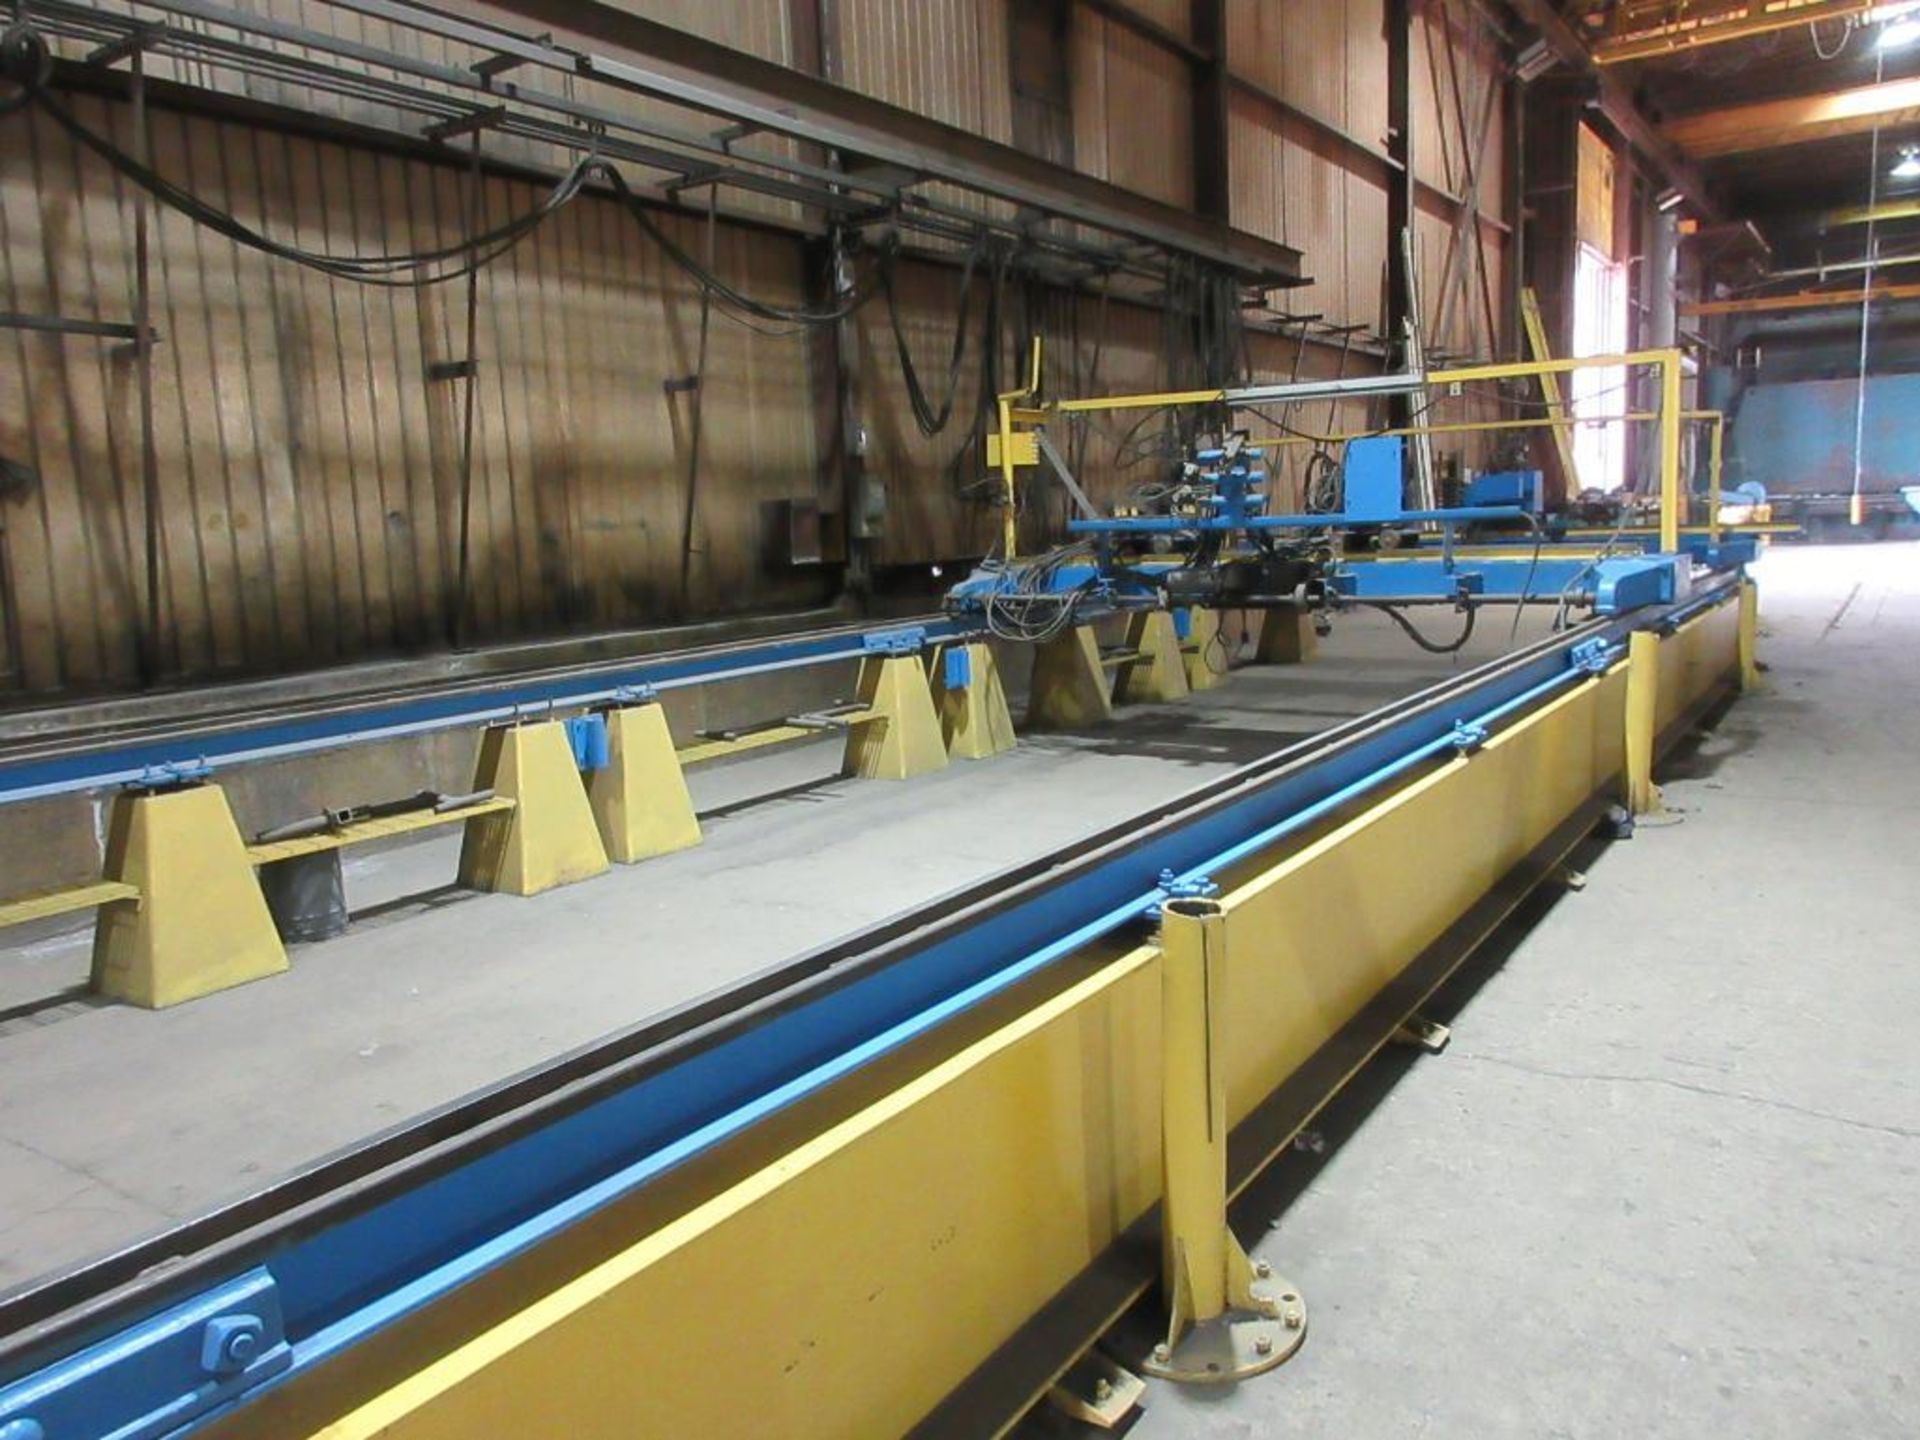 PANDJRIS CUTTING TABLE, 12'W X 66'L APPROX, WITH 3 12' BRIDGES, 3 TORCHES, TROLLIES, WALL MOUNTED WI - Image 4 of 11